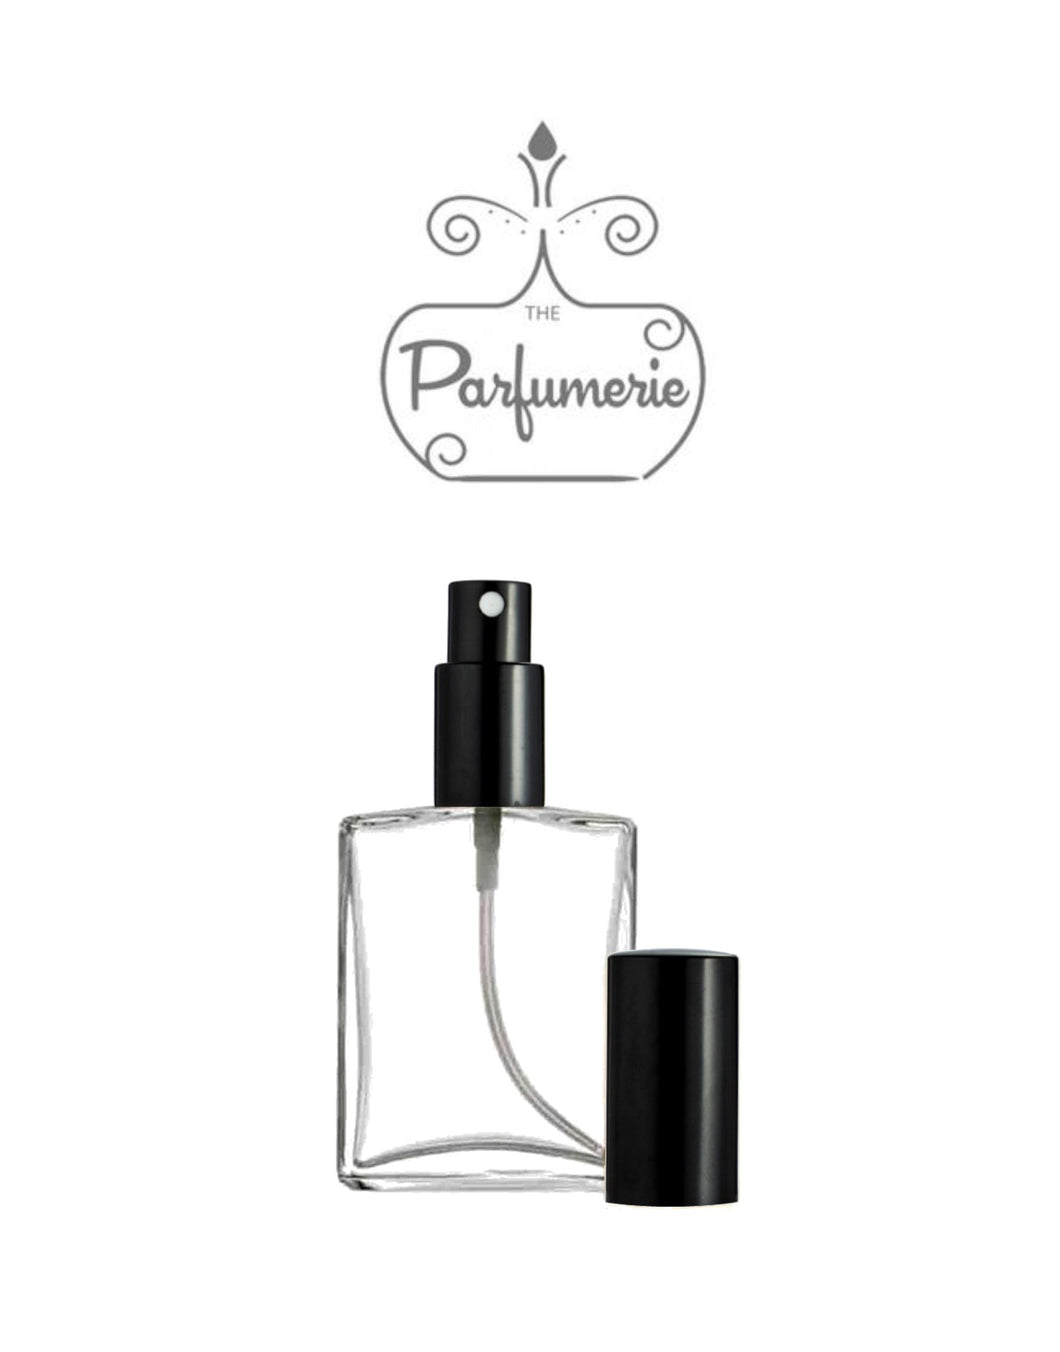 Refillable Perfume Bottle. Clear glass Flat Spray Bottle in 2 oz.  This Large Perfume Bottle has a Black Sprayer Top and Over Cap.